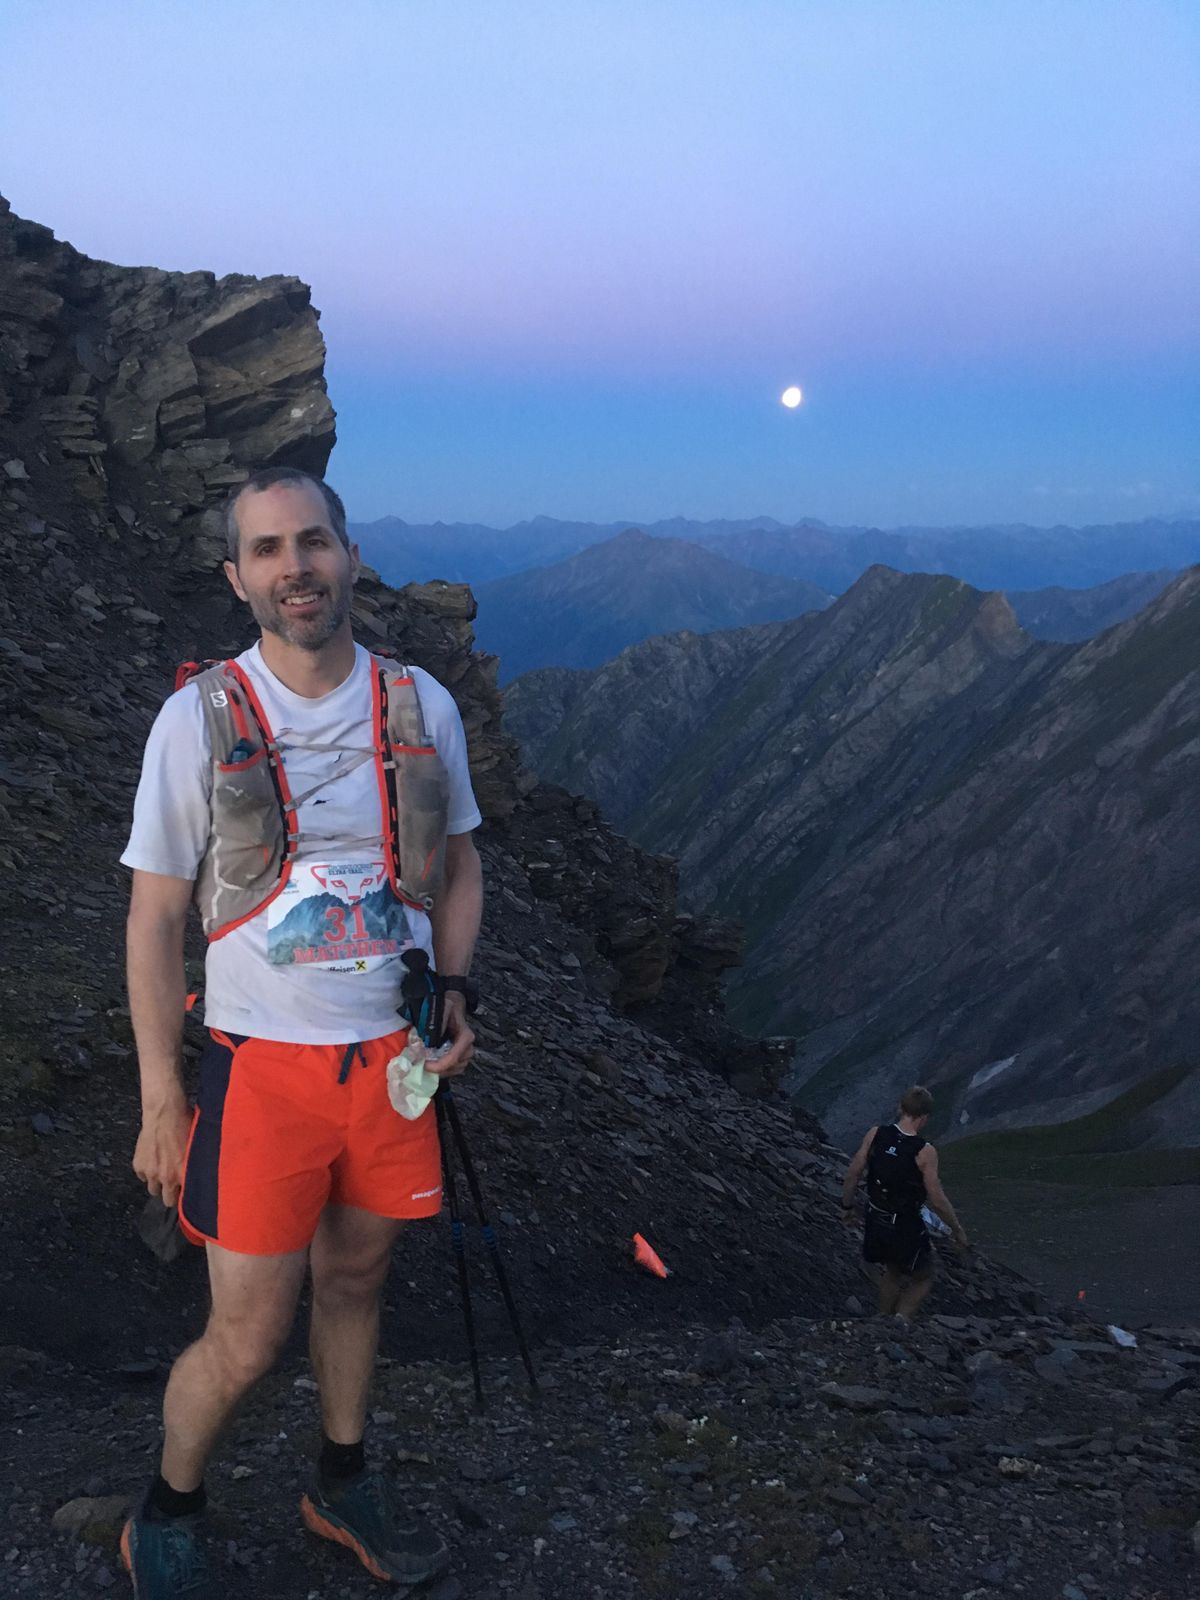 Matt Zuchetto poses for a photo during a ultra-race in the Alps. (Courtesy)